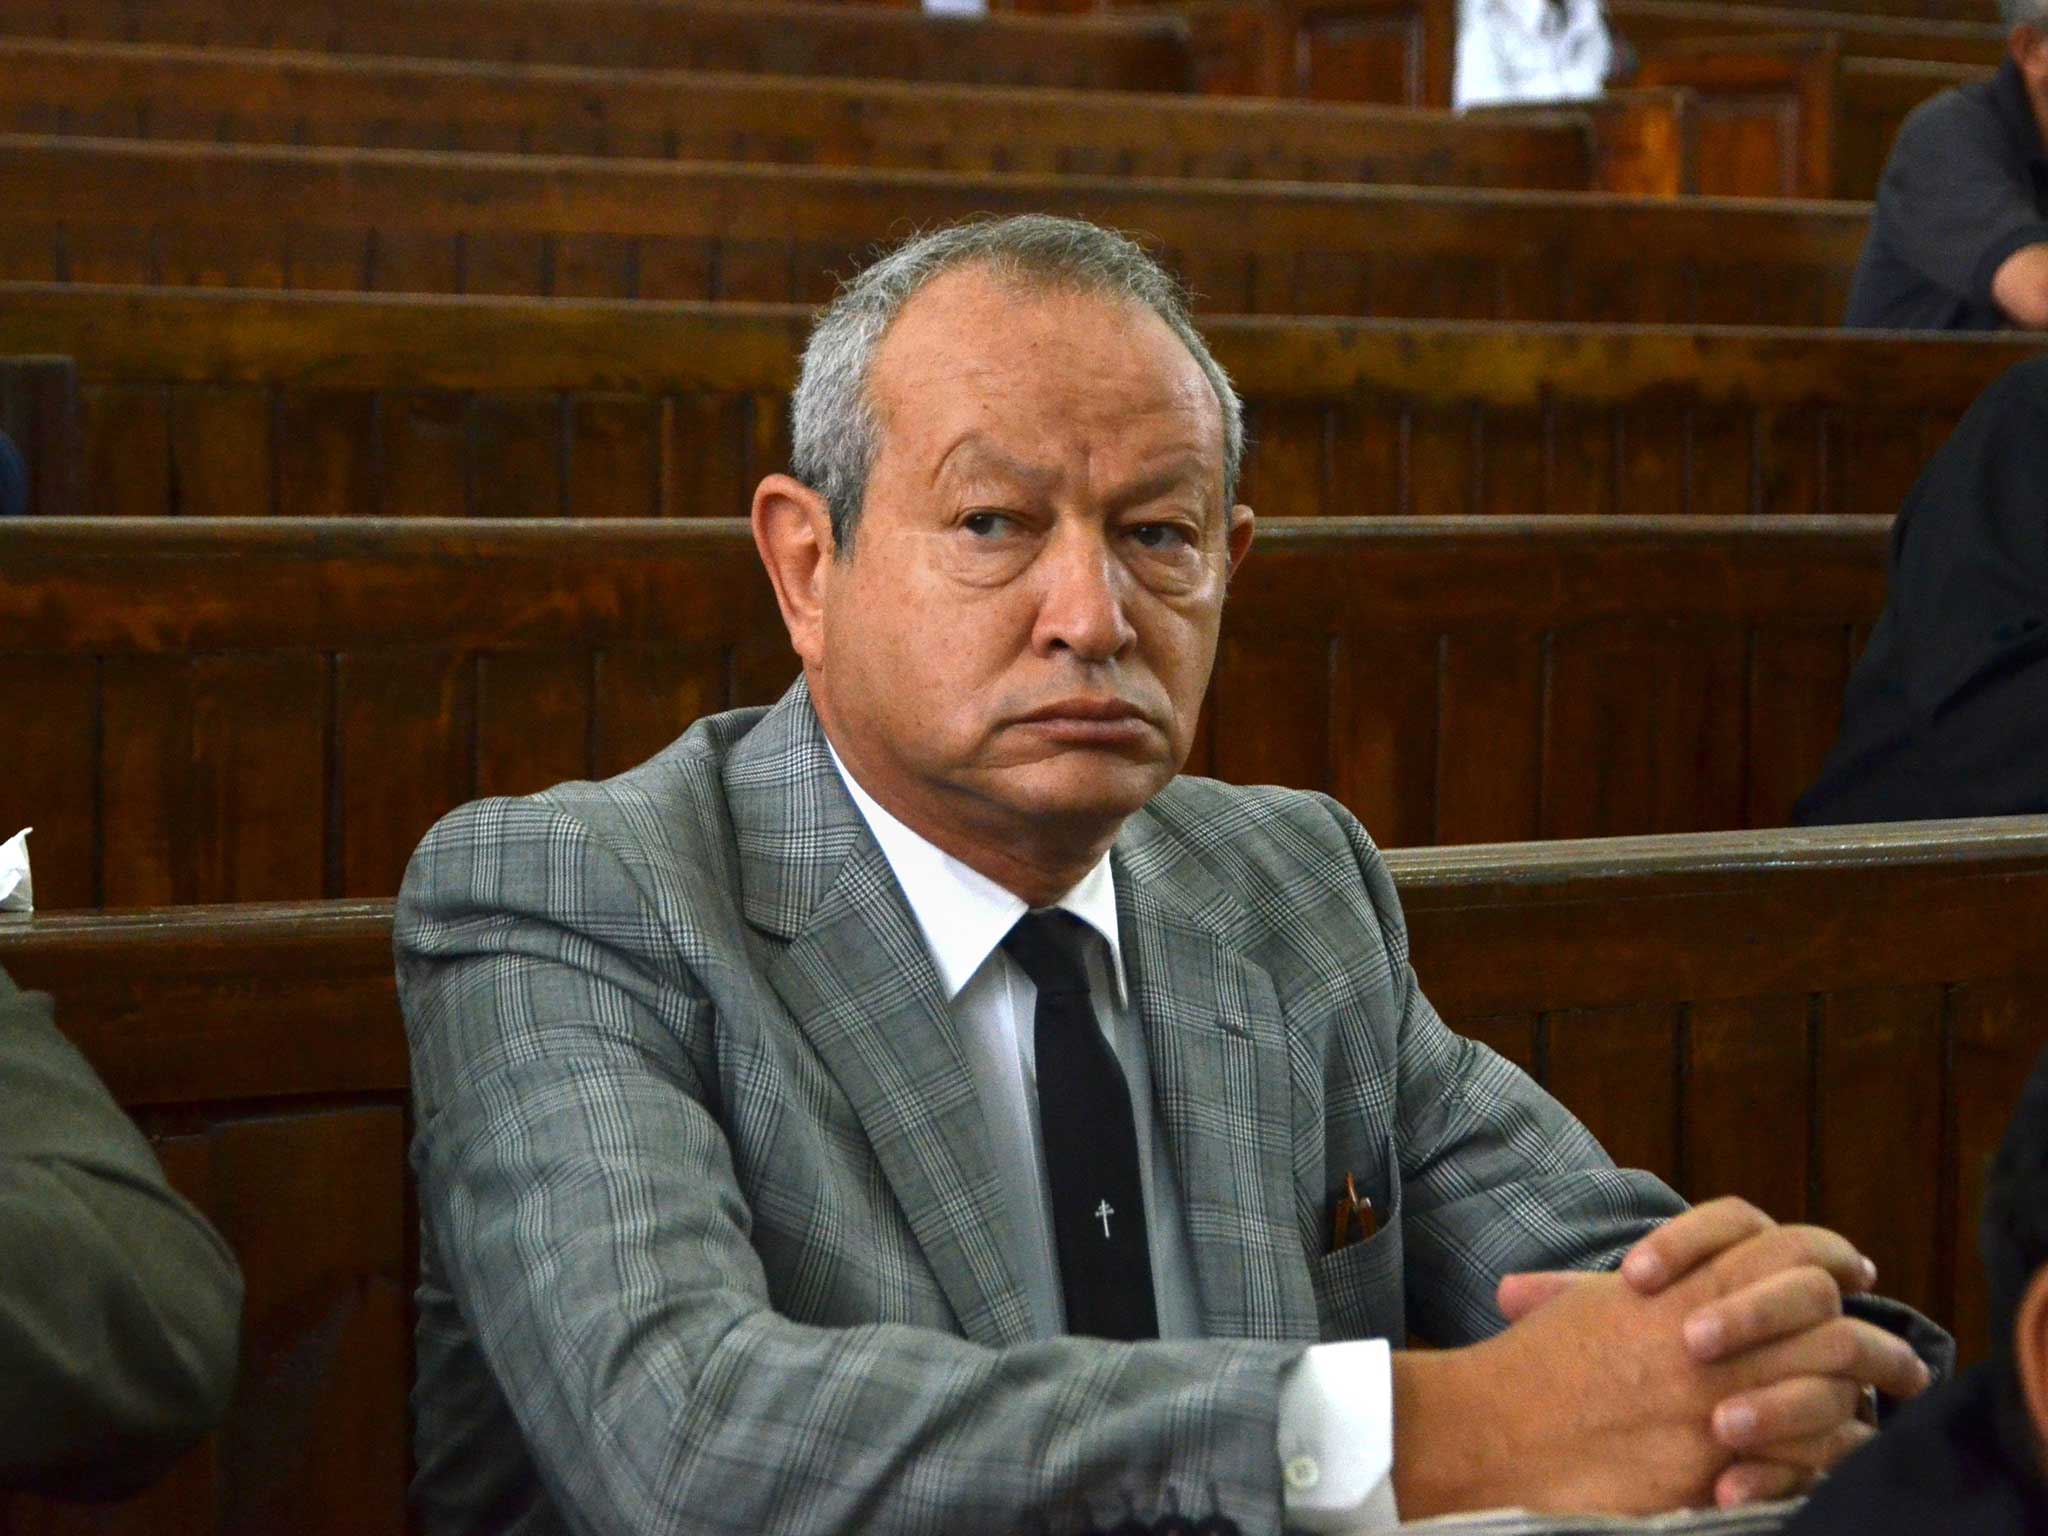 Sawiris, pictured here testifying in the defence of the Al Jazeera journalists imprisoned in Egypt, has offered to buy an island